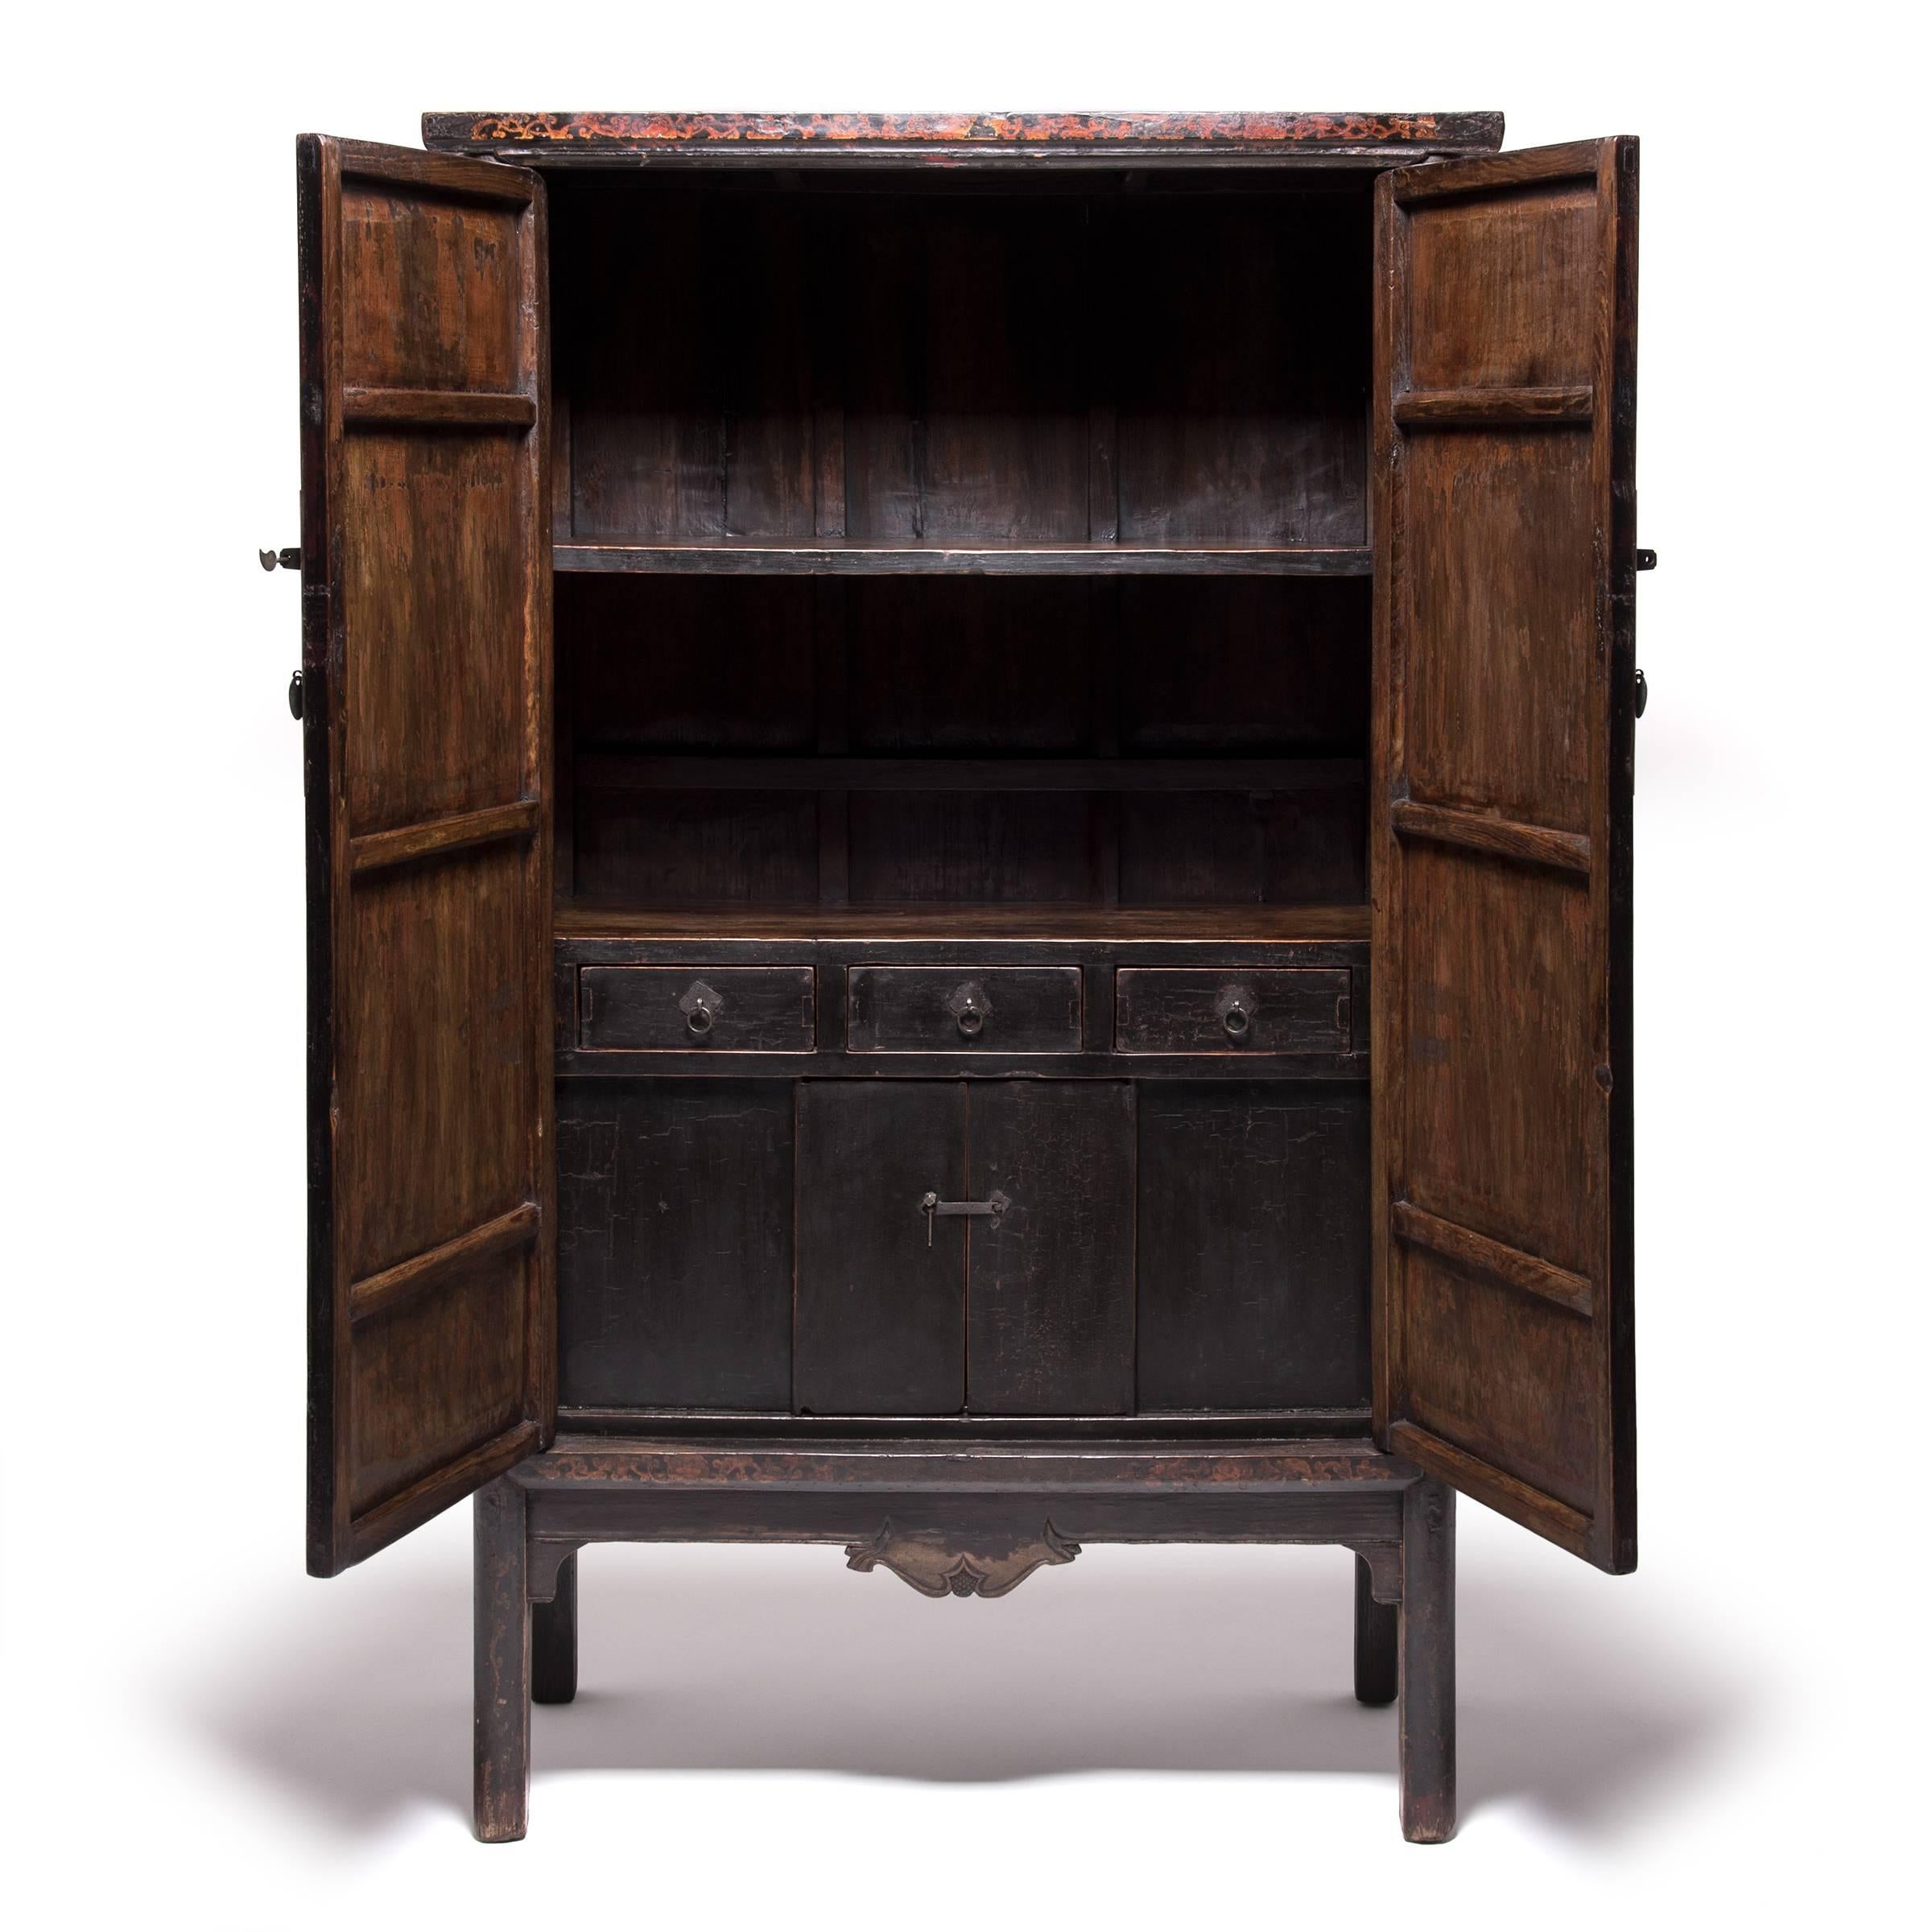 With exceptionally rich lacquerwork, this cabinet bears traces of the original ornate gilt scenery, depicting traditional Chinese palatial courtyard structures in a mountainous park setting. It is framed by intricately scrolled gilt work on the